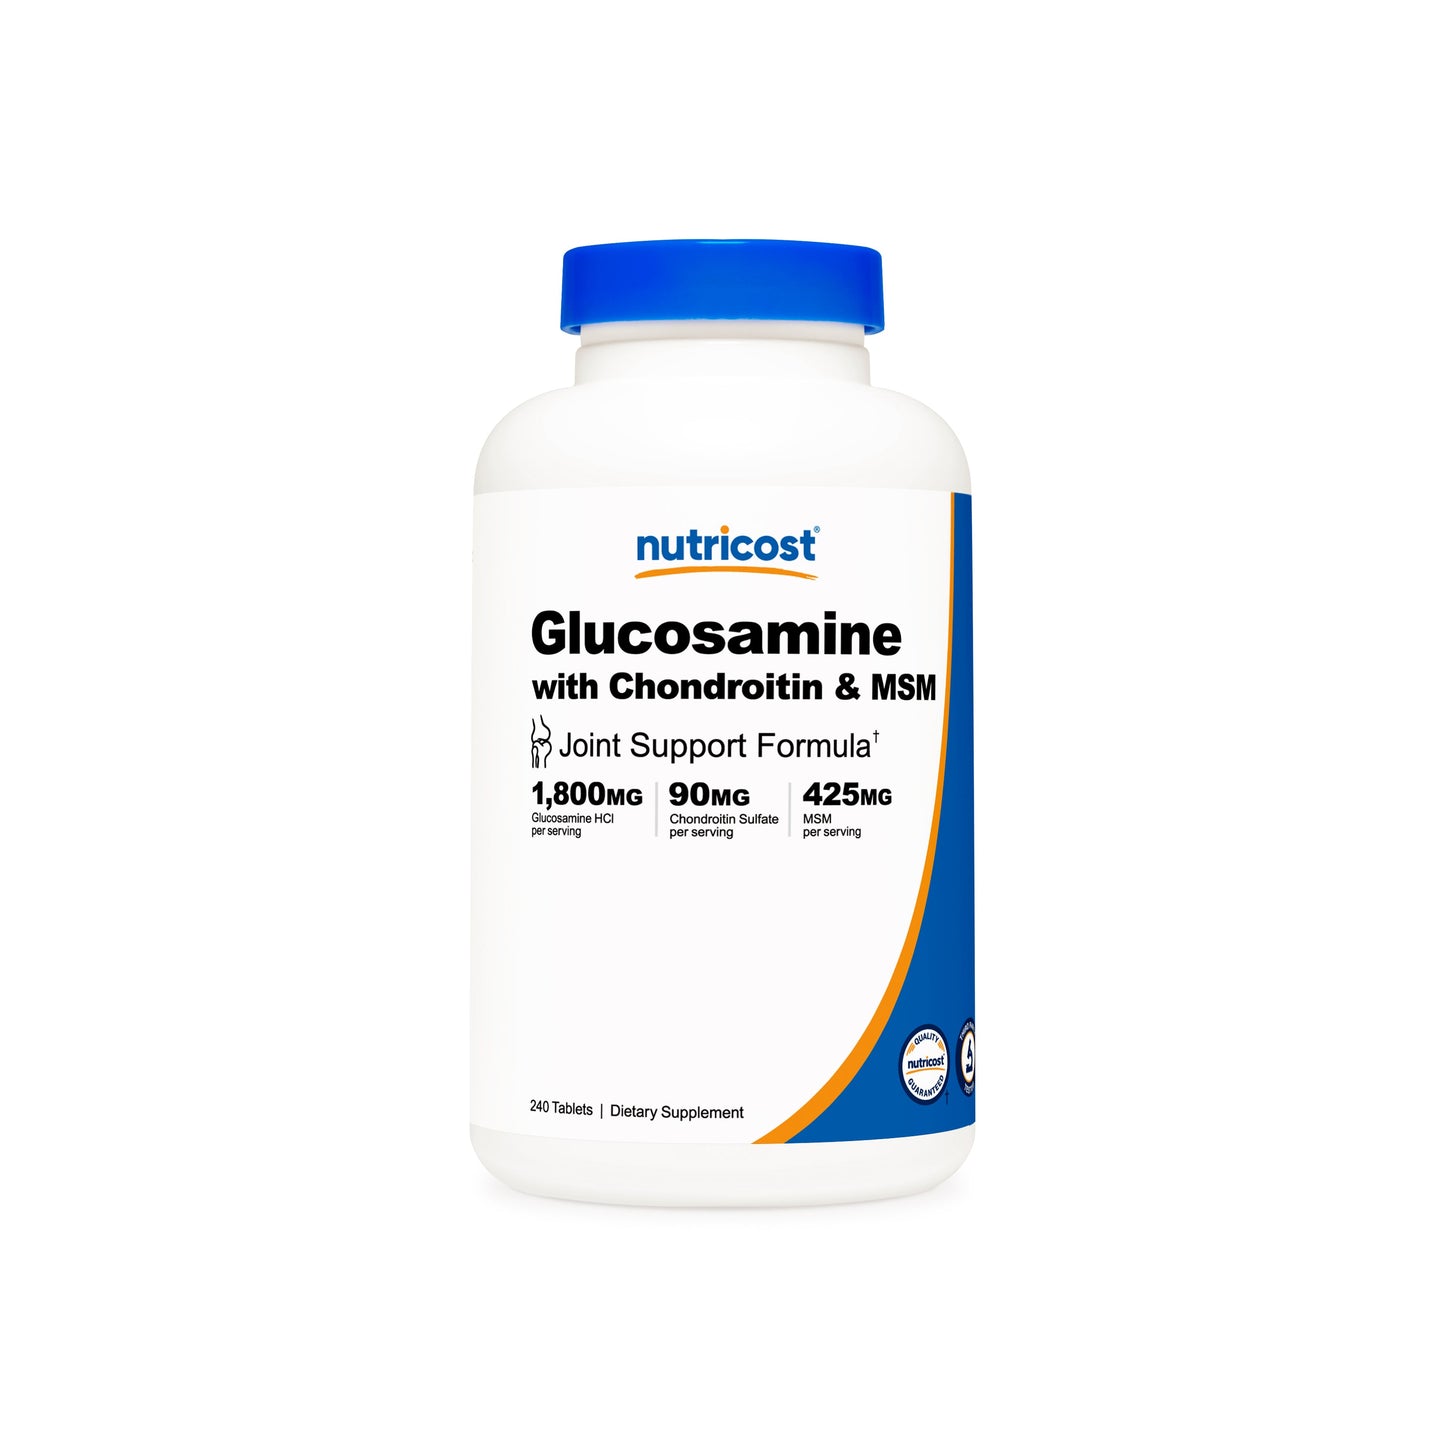 Nutricost Glucosamine + Chondroitin + MSM Tablets